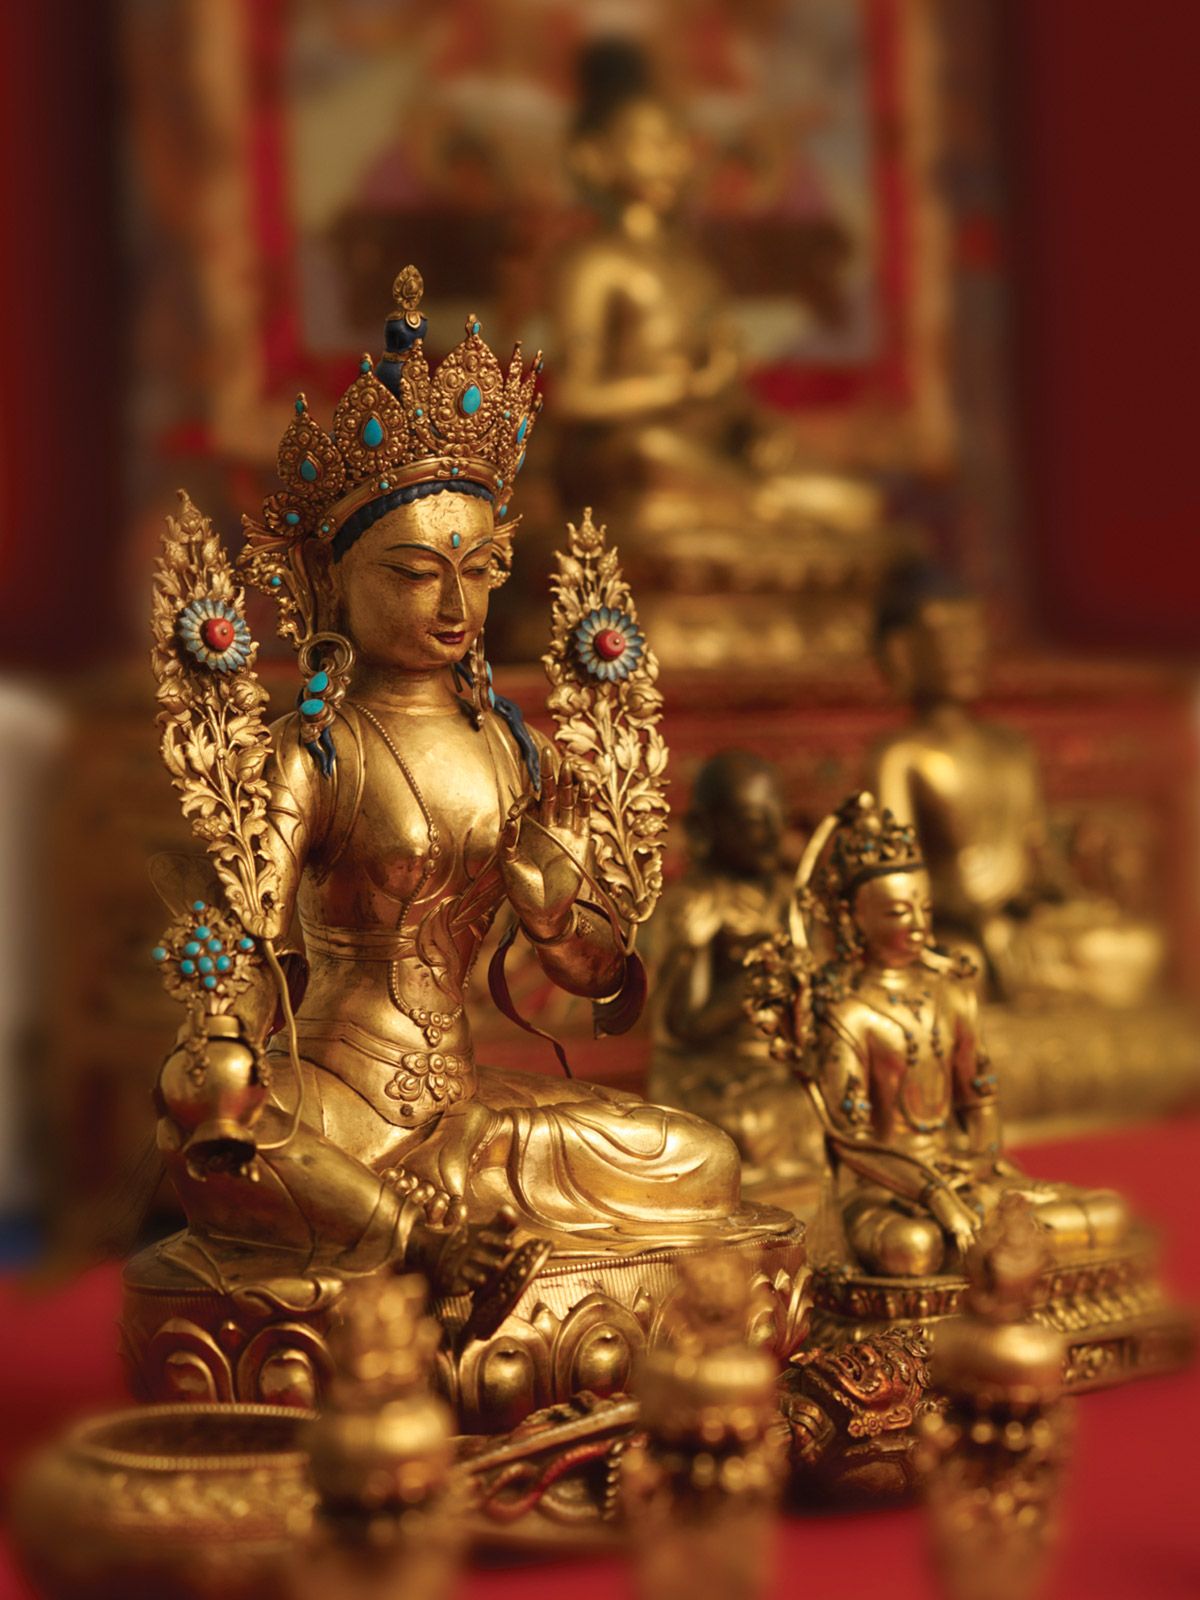 The National Museum of Asian Art has created an app that enables visitors to explore its Tibetan Buddhist Shrine Room Courtesy of the Freer Gallery of Art and Arthur M. Sackler Gallery